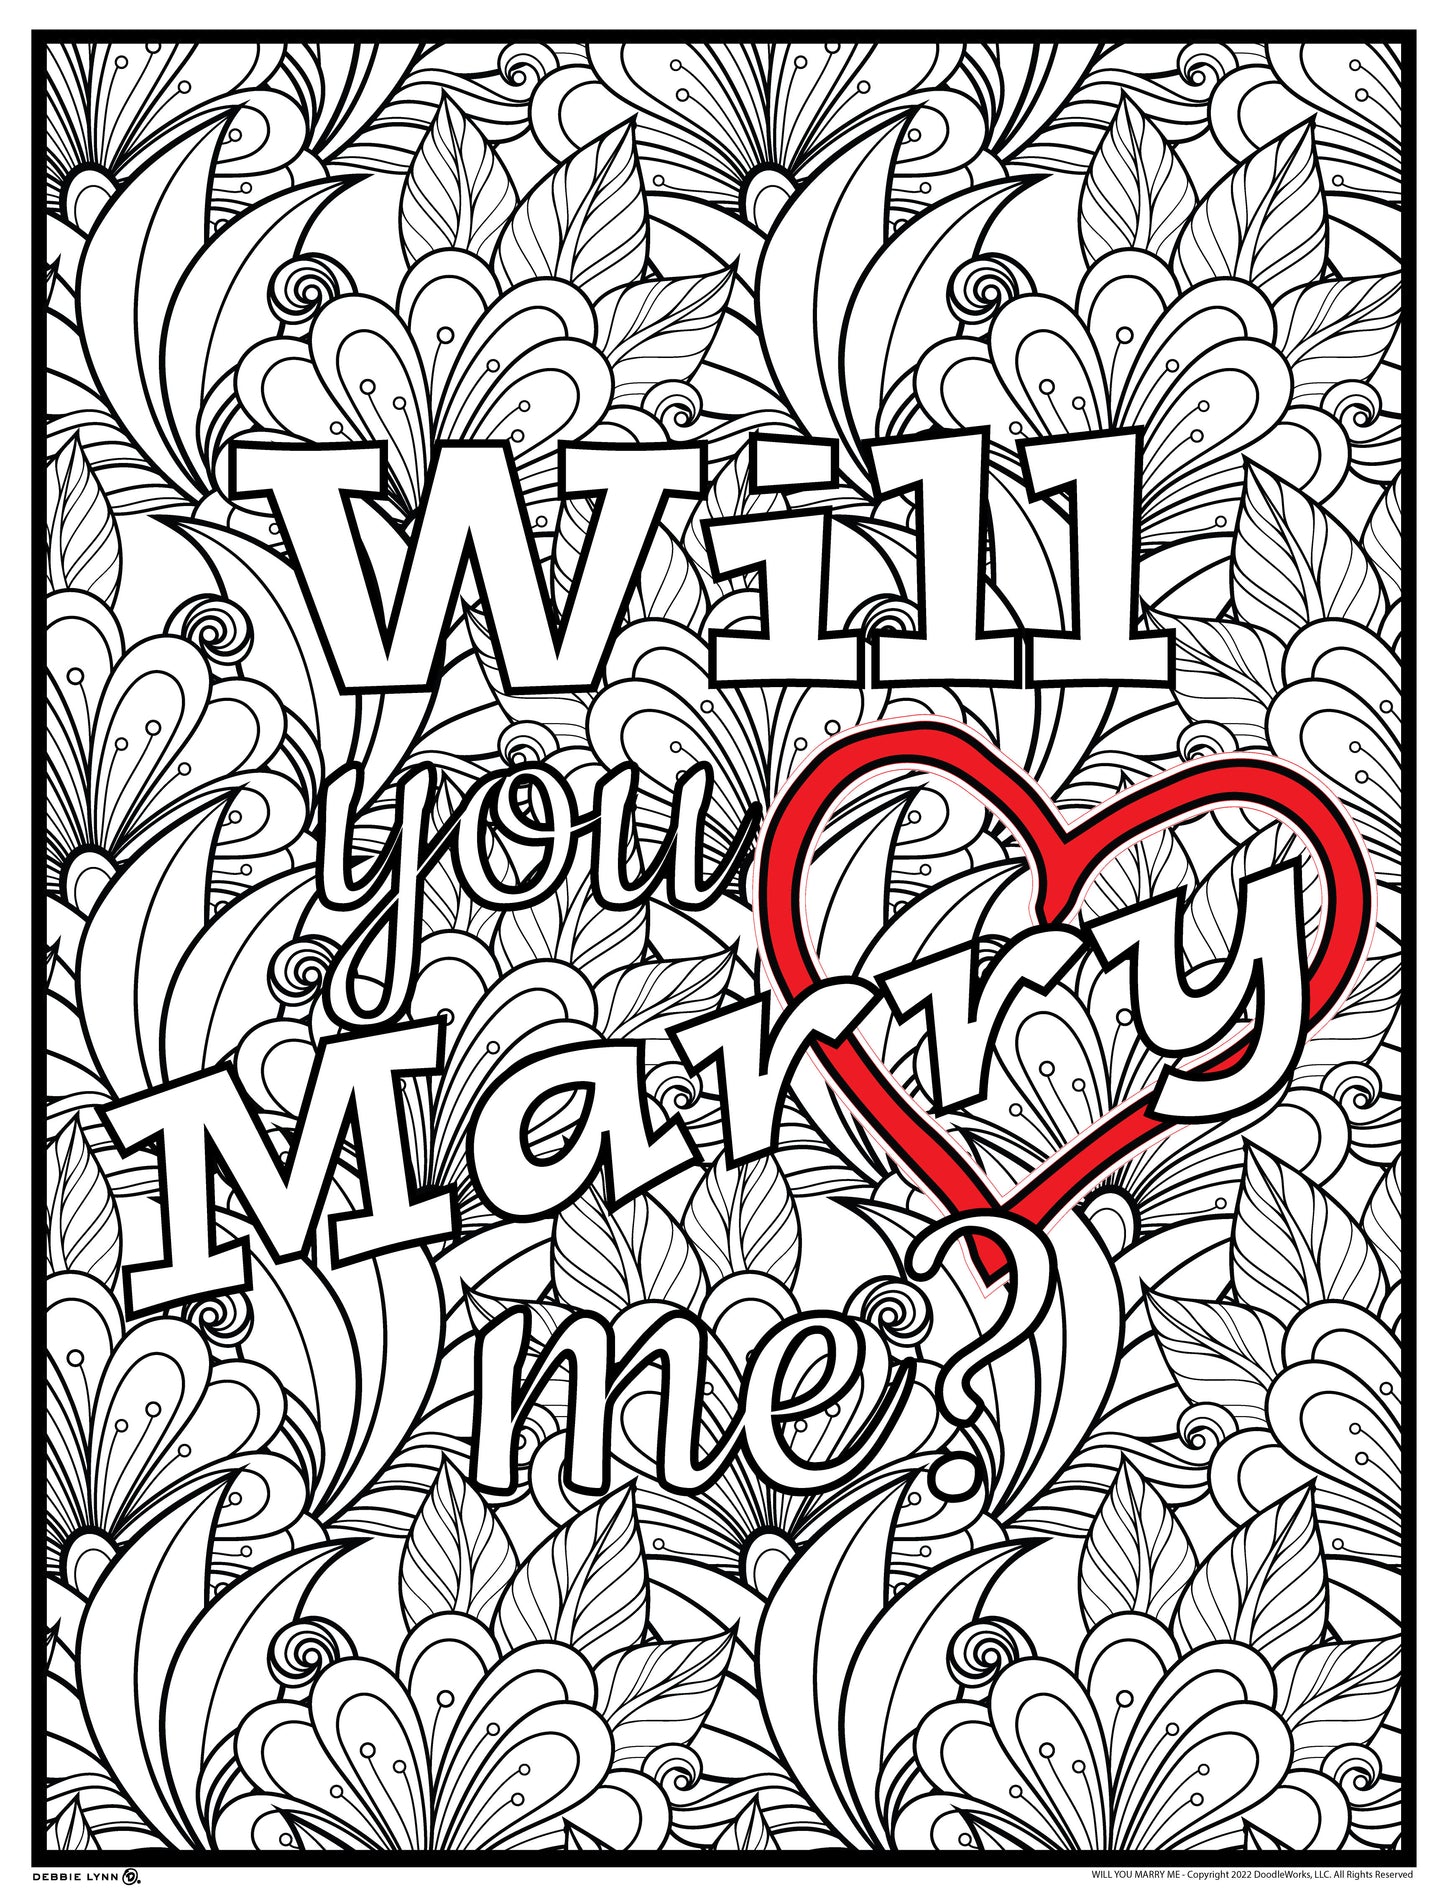 Will Your Marry Me? Personalized Giant Coloring Poster 46" x 60"